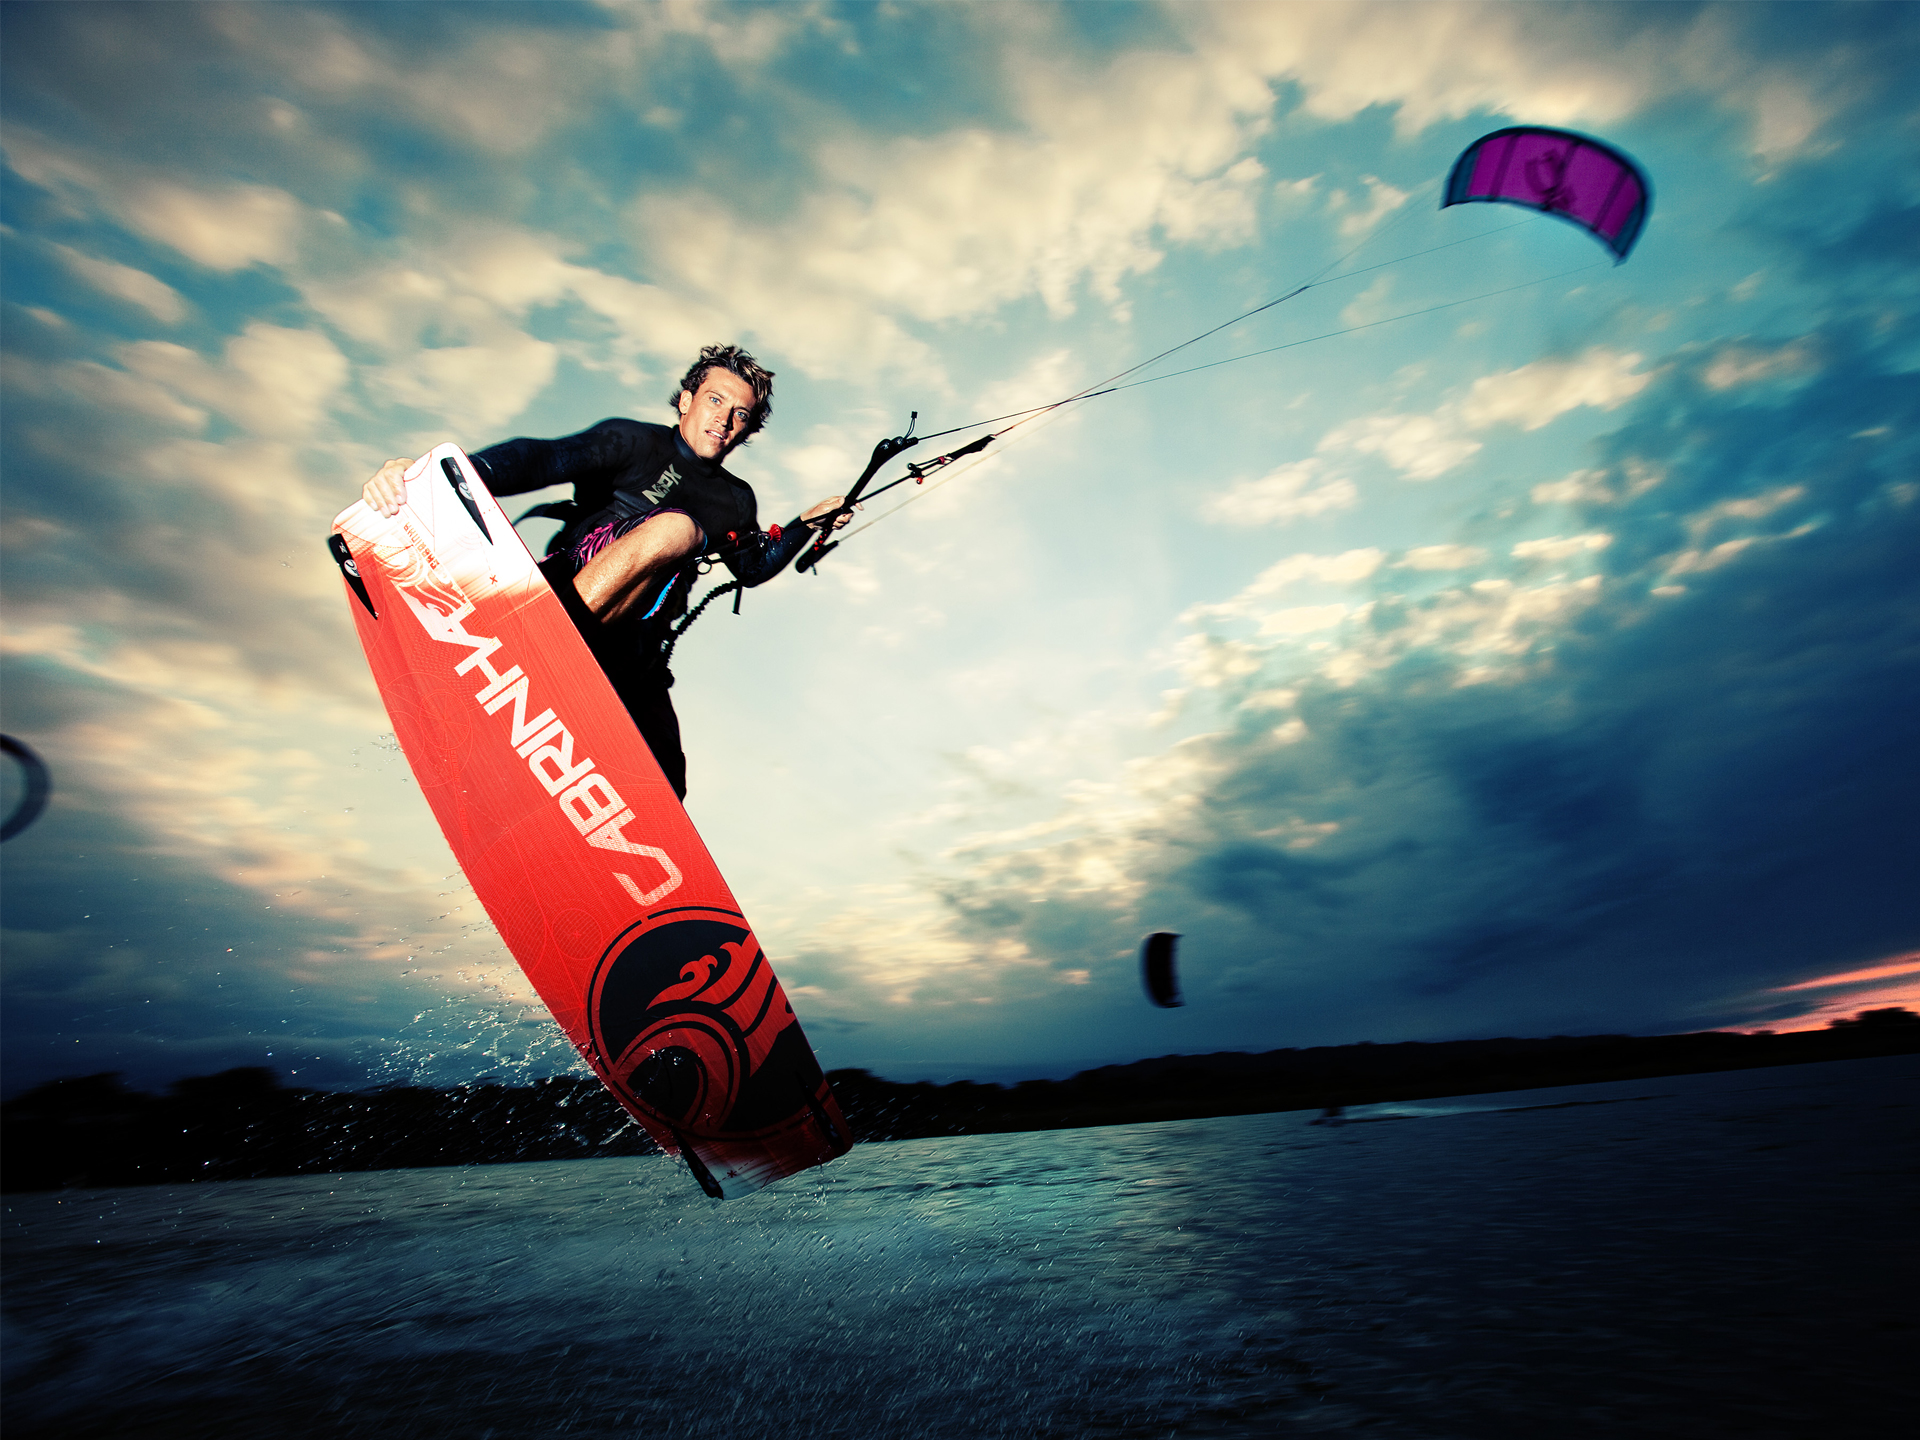 kitesurf wallpaper image - Damien LeRoy with a tailgrab at dusk on his Cabrinha kites gear - in resolution: Standard 4:3 1920 X 1440